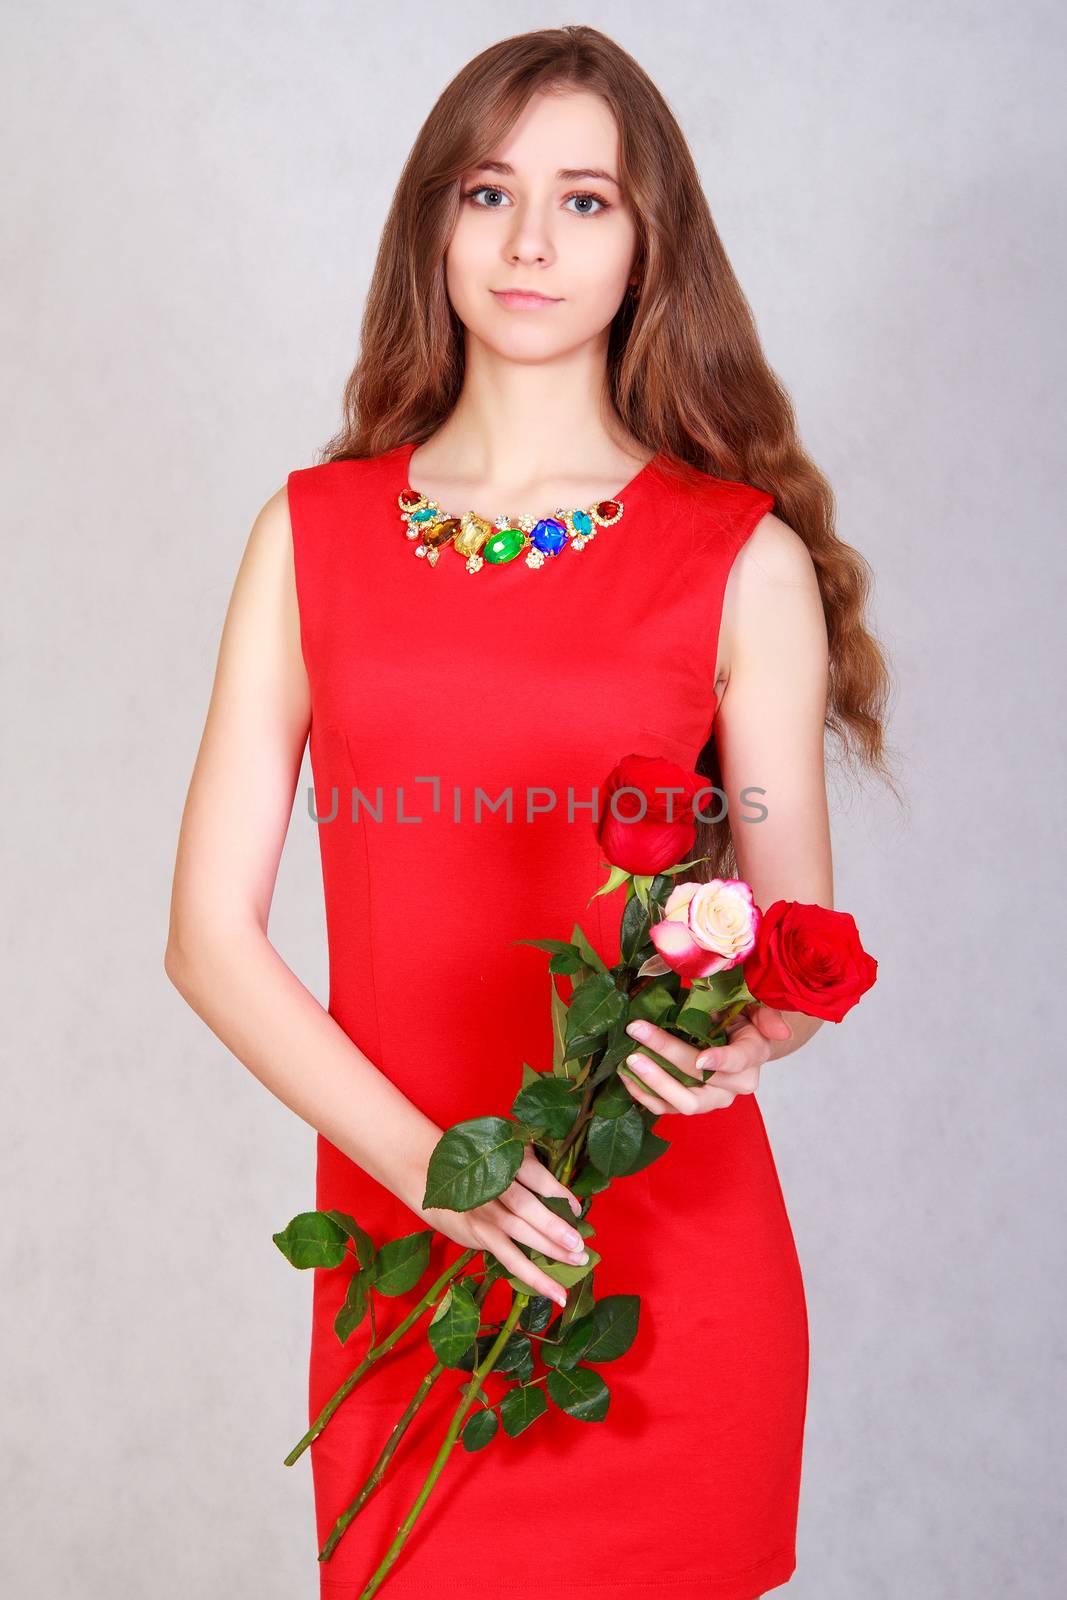 Portrait of a young attractive woman with a bunch of red roses over grey background